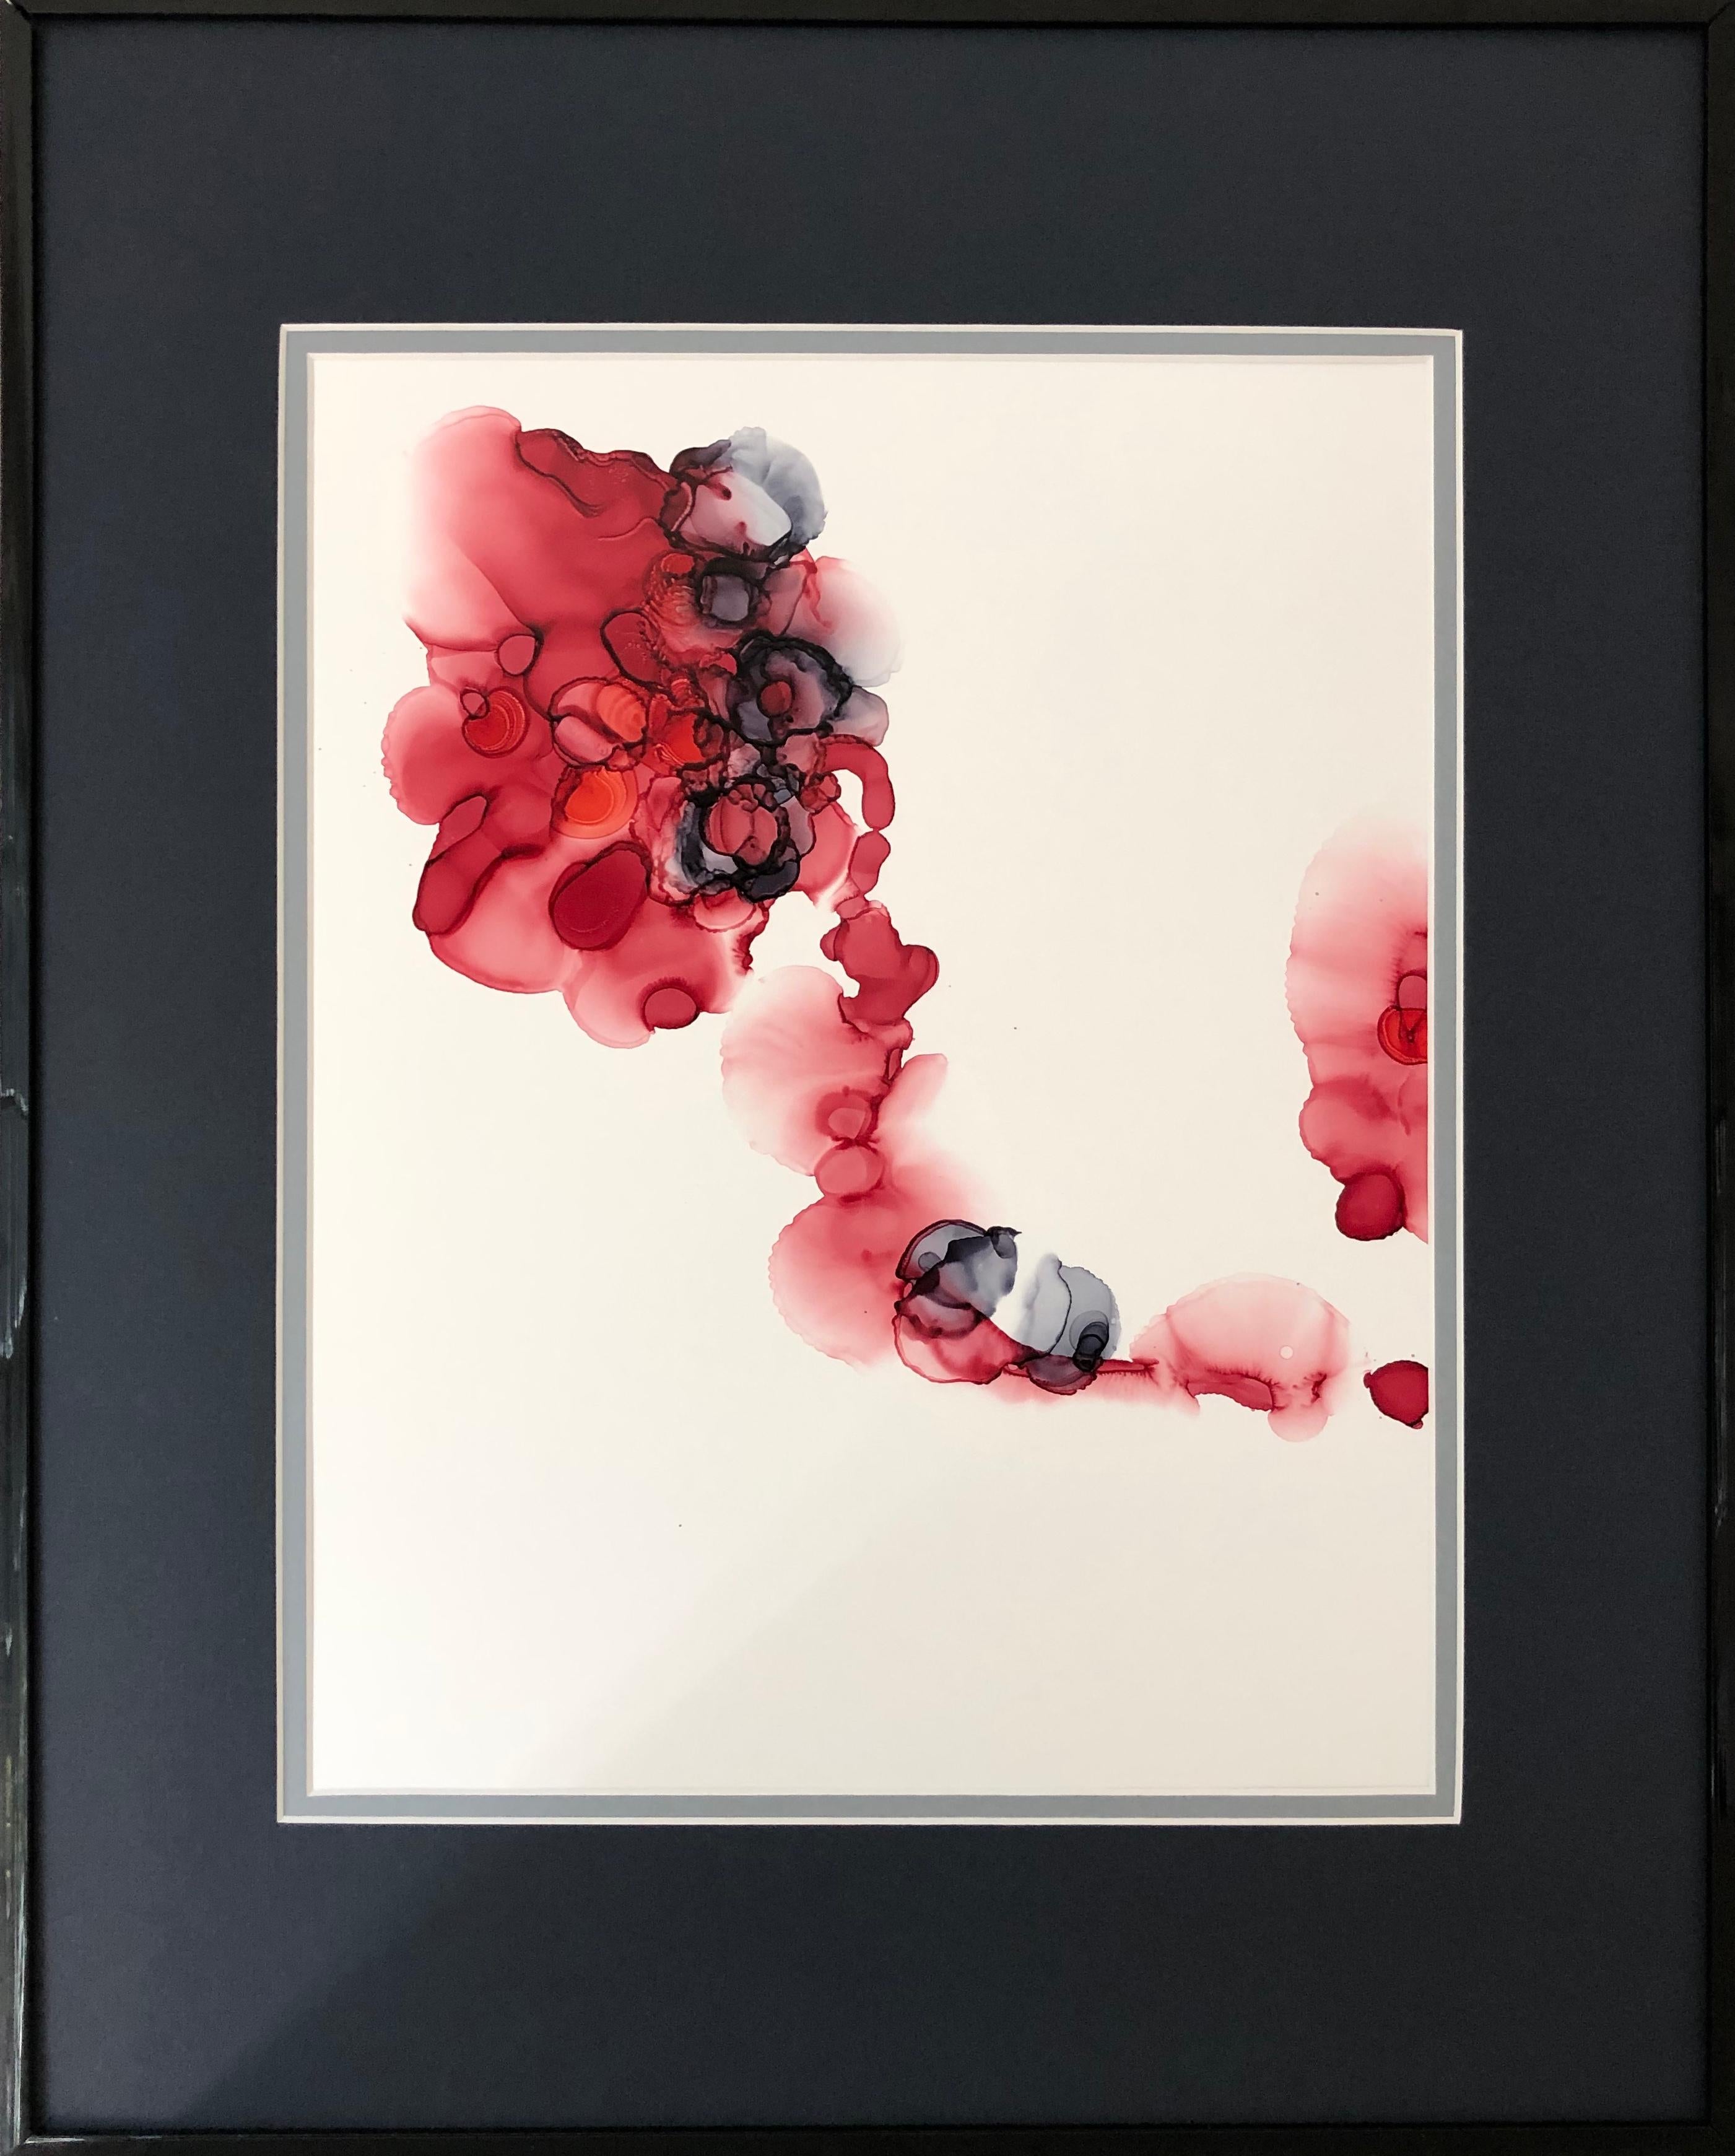 Singed roses - abstraction art, made in cherry red, garnet red, white, grey - Art by Mila Akopova